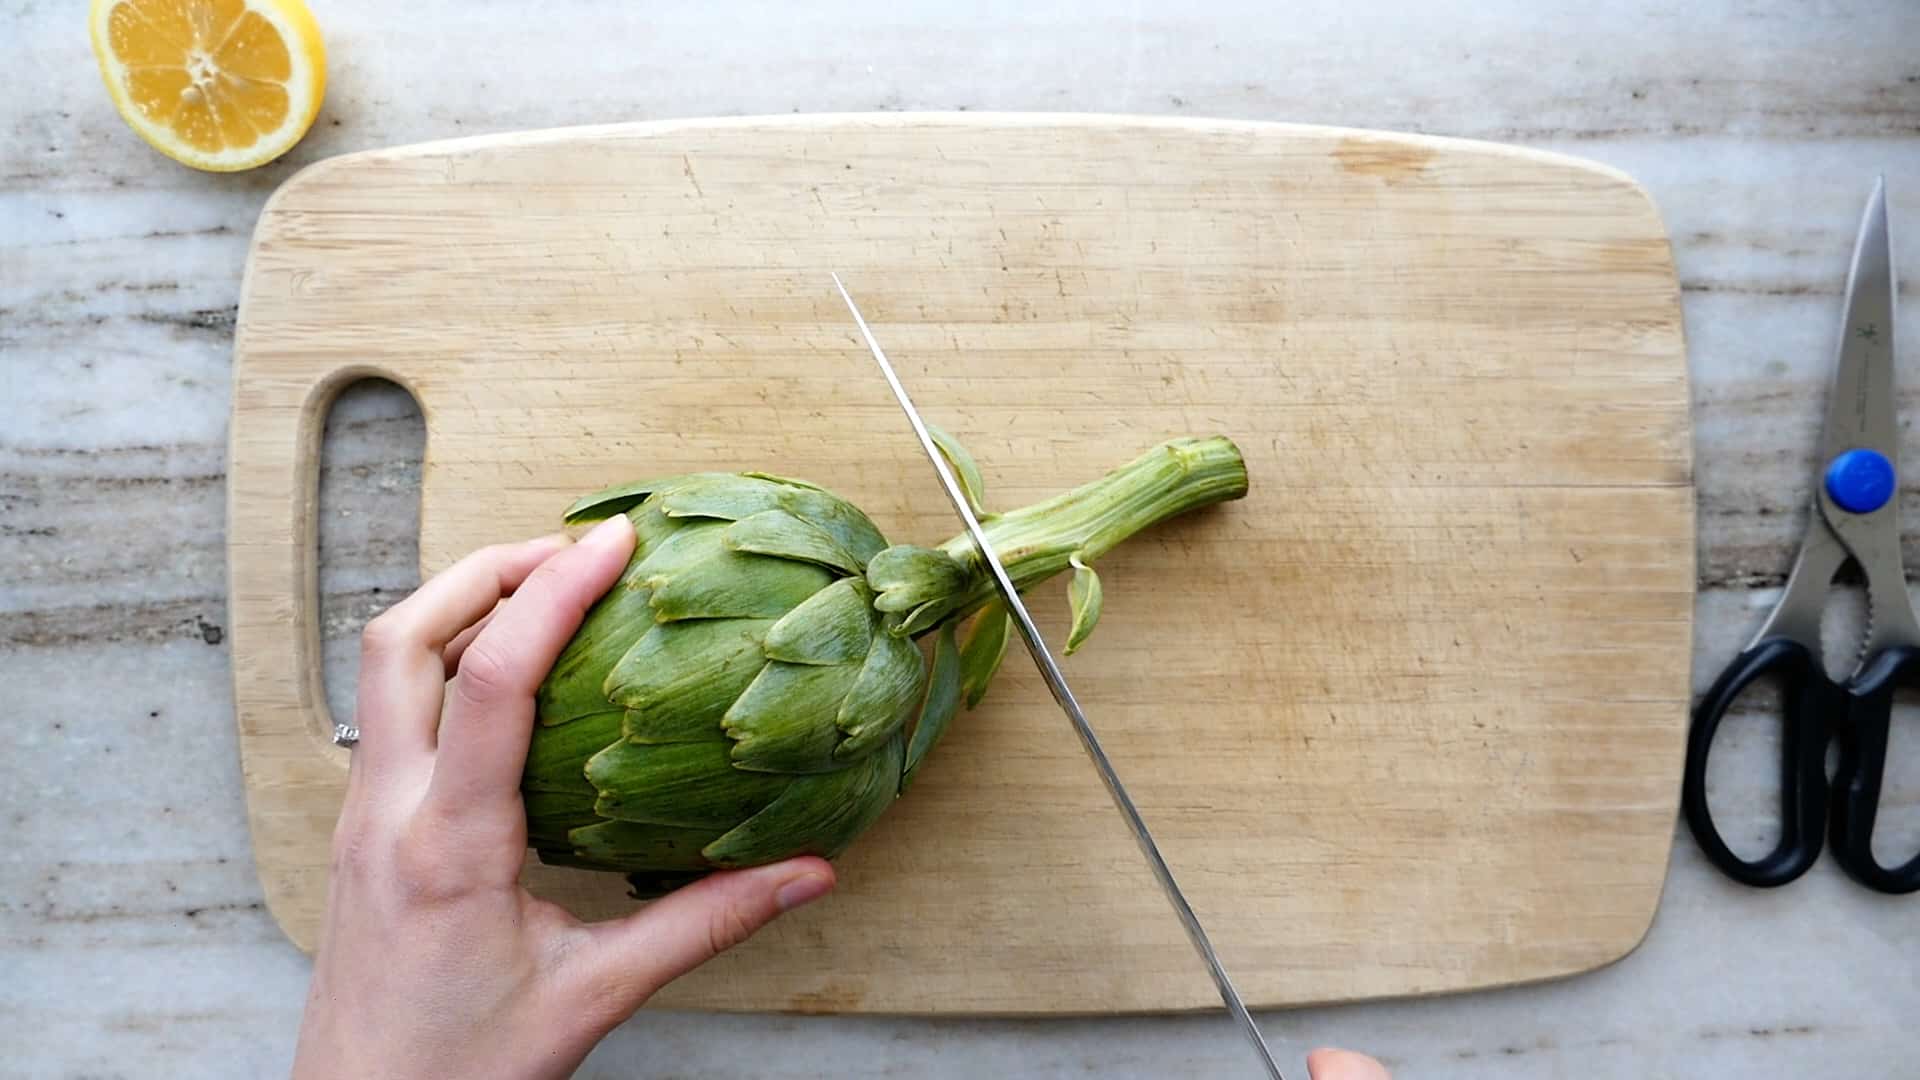 woman slicing off the stem of an artichoke on a cutting board